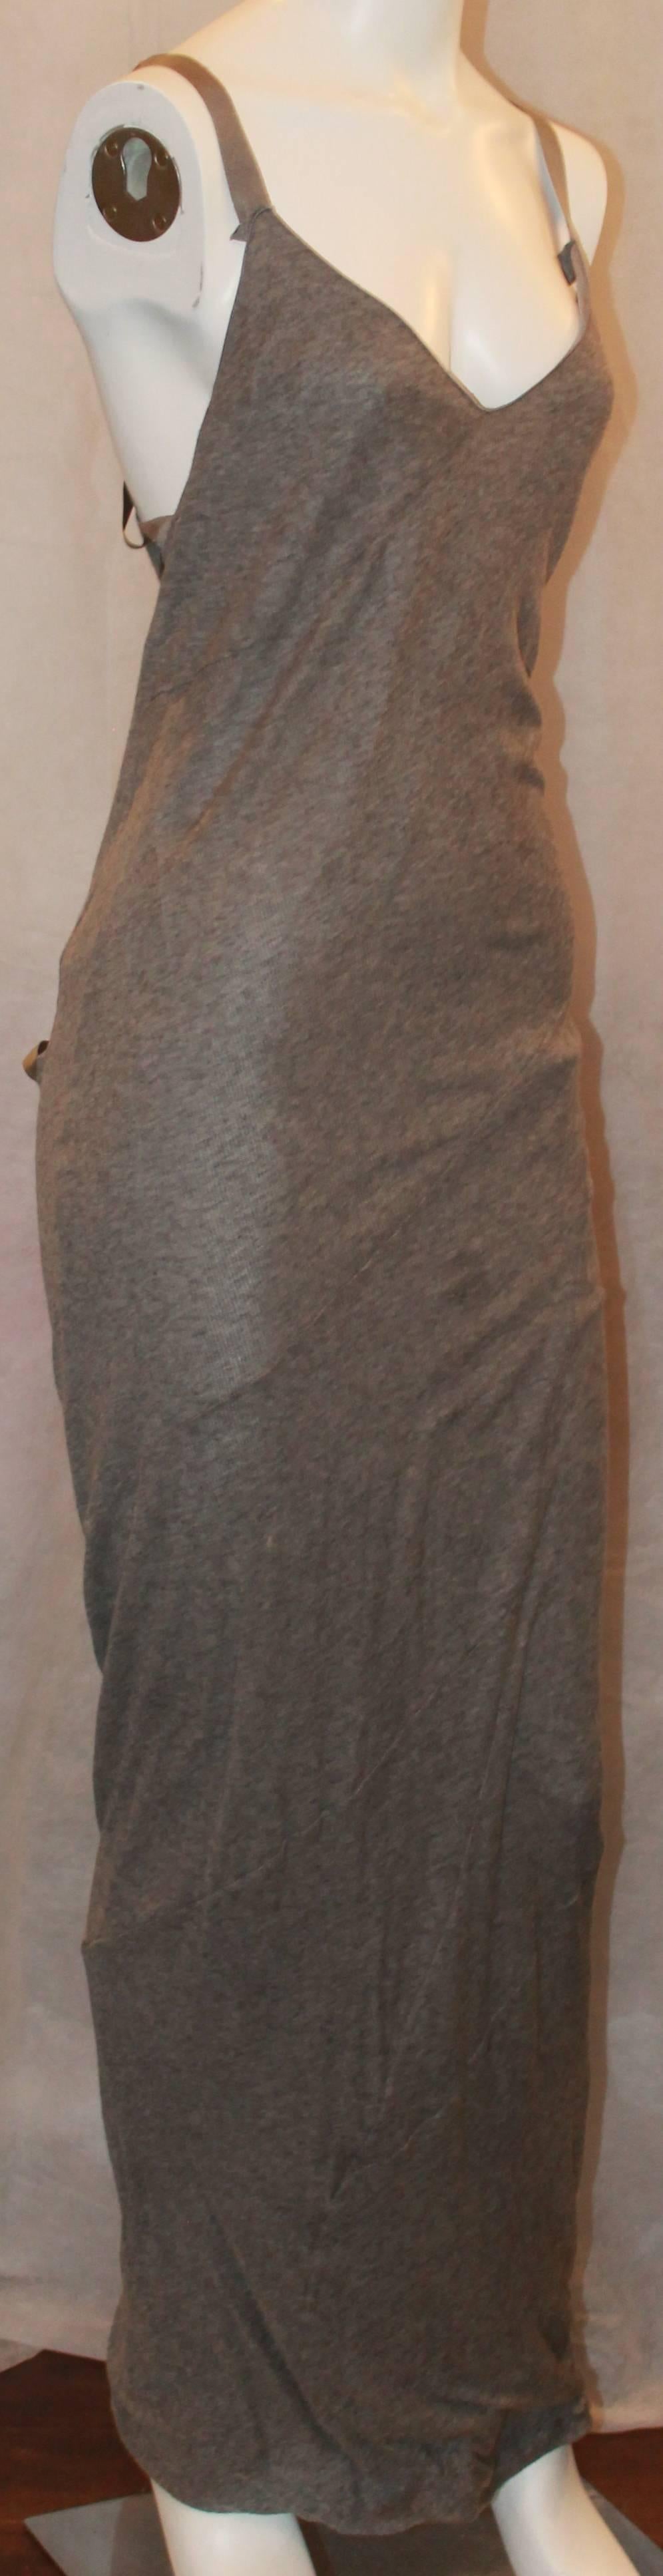 Nina Ricci Grey Cashmere Maxi Dress w/ Silk Ribbon Straps - 36.  This dress is in excellent condition.  It features a silk lining, silk ribbon/knot in a criss cross fashion in the back, and deep v neck in the front.

Measurements:
Bust: